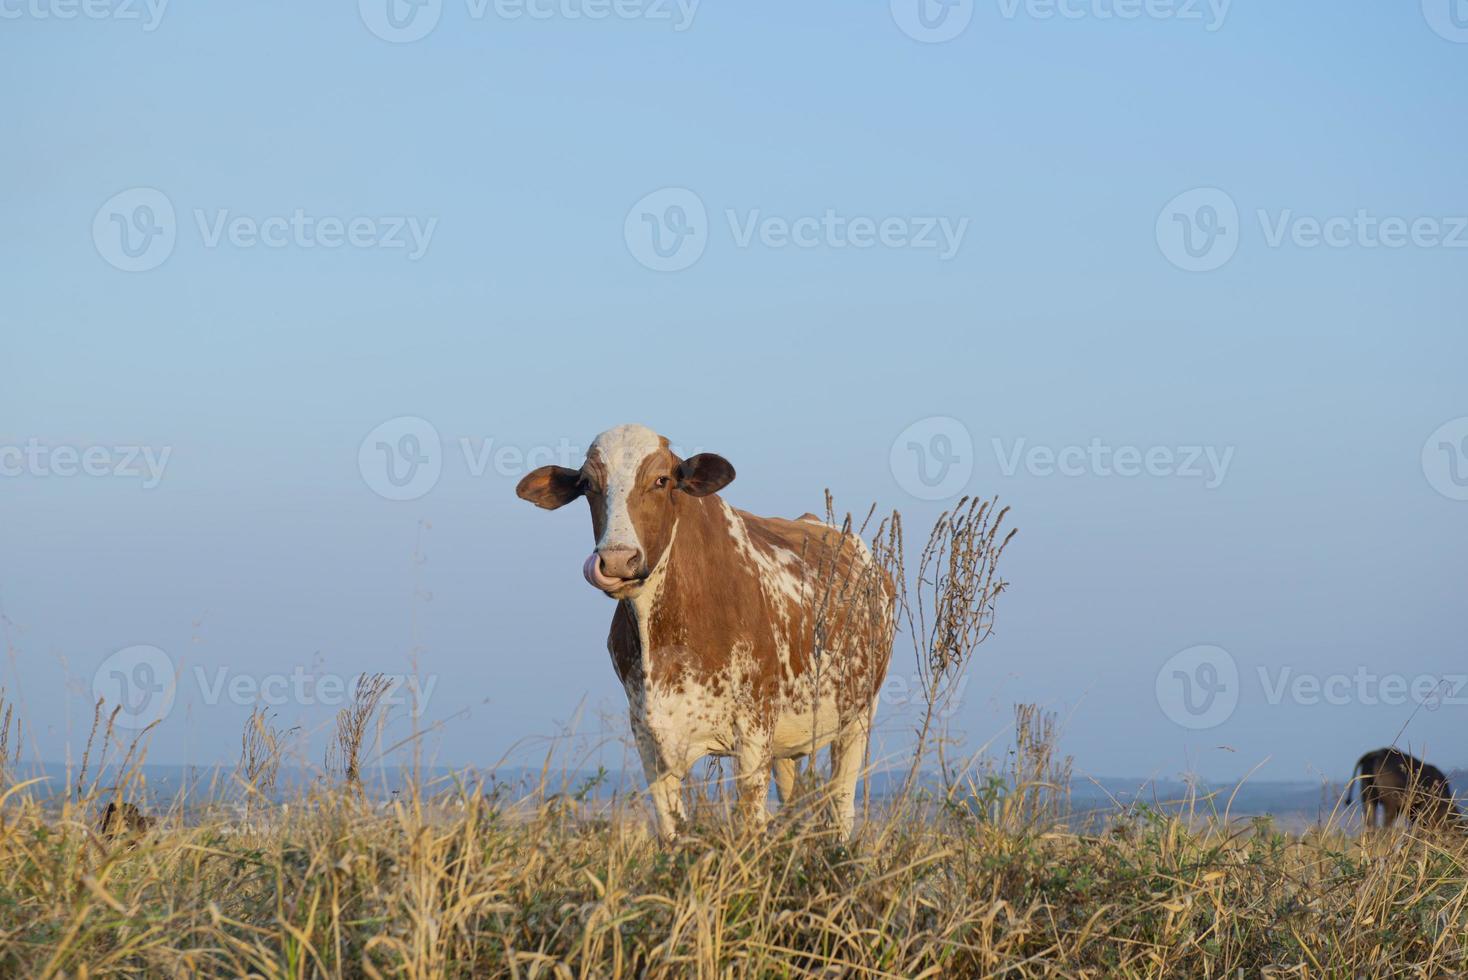 Beautiful brown and white spotted Dutch cow photo